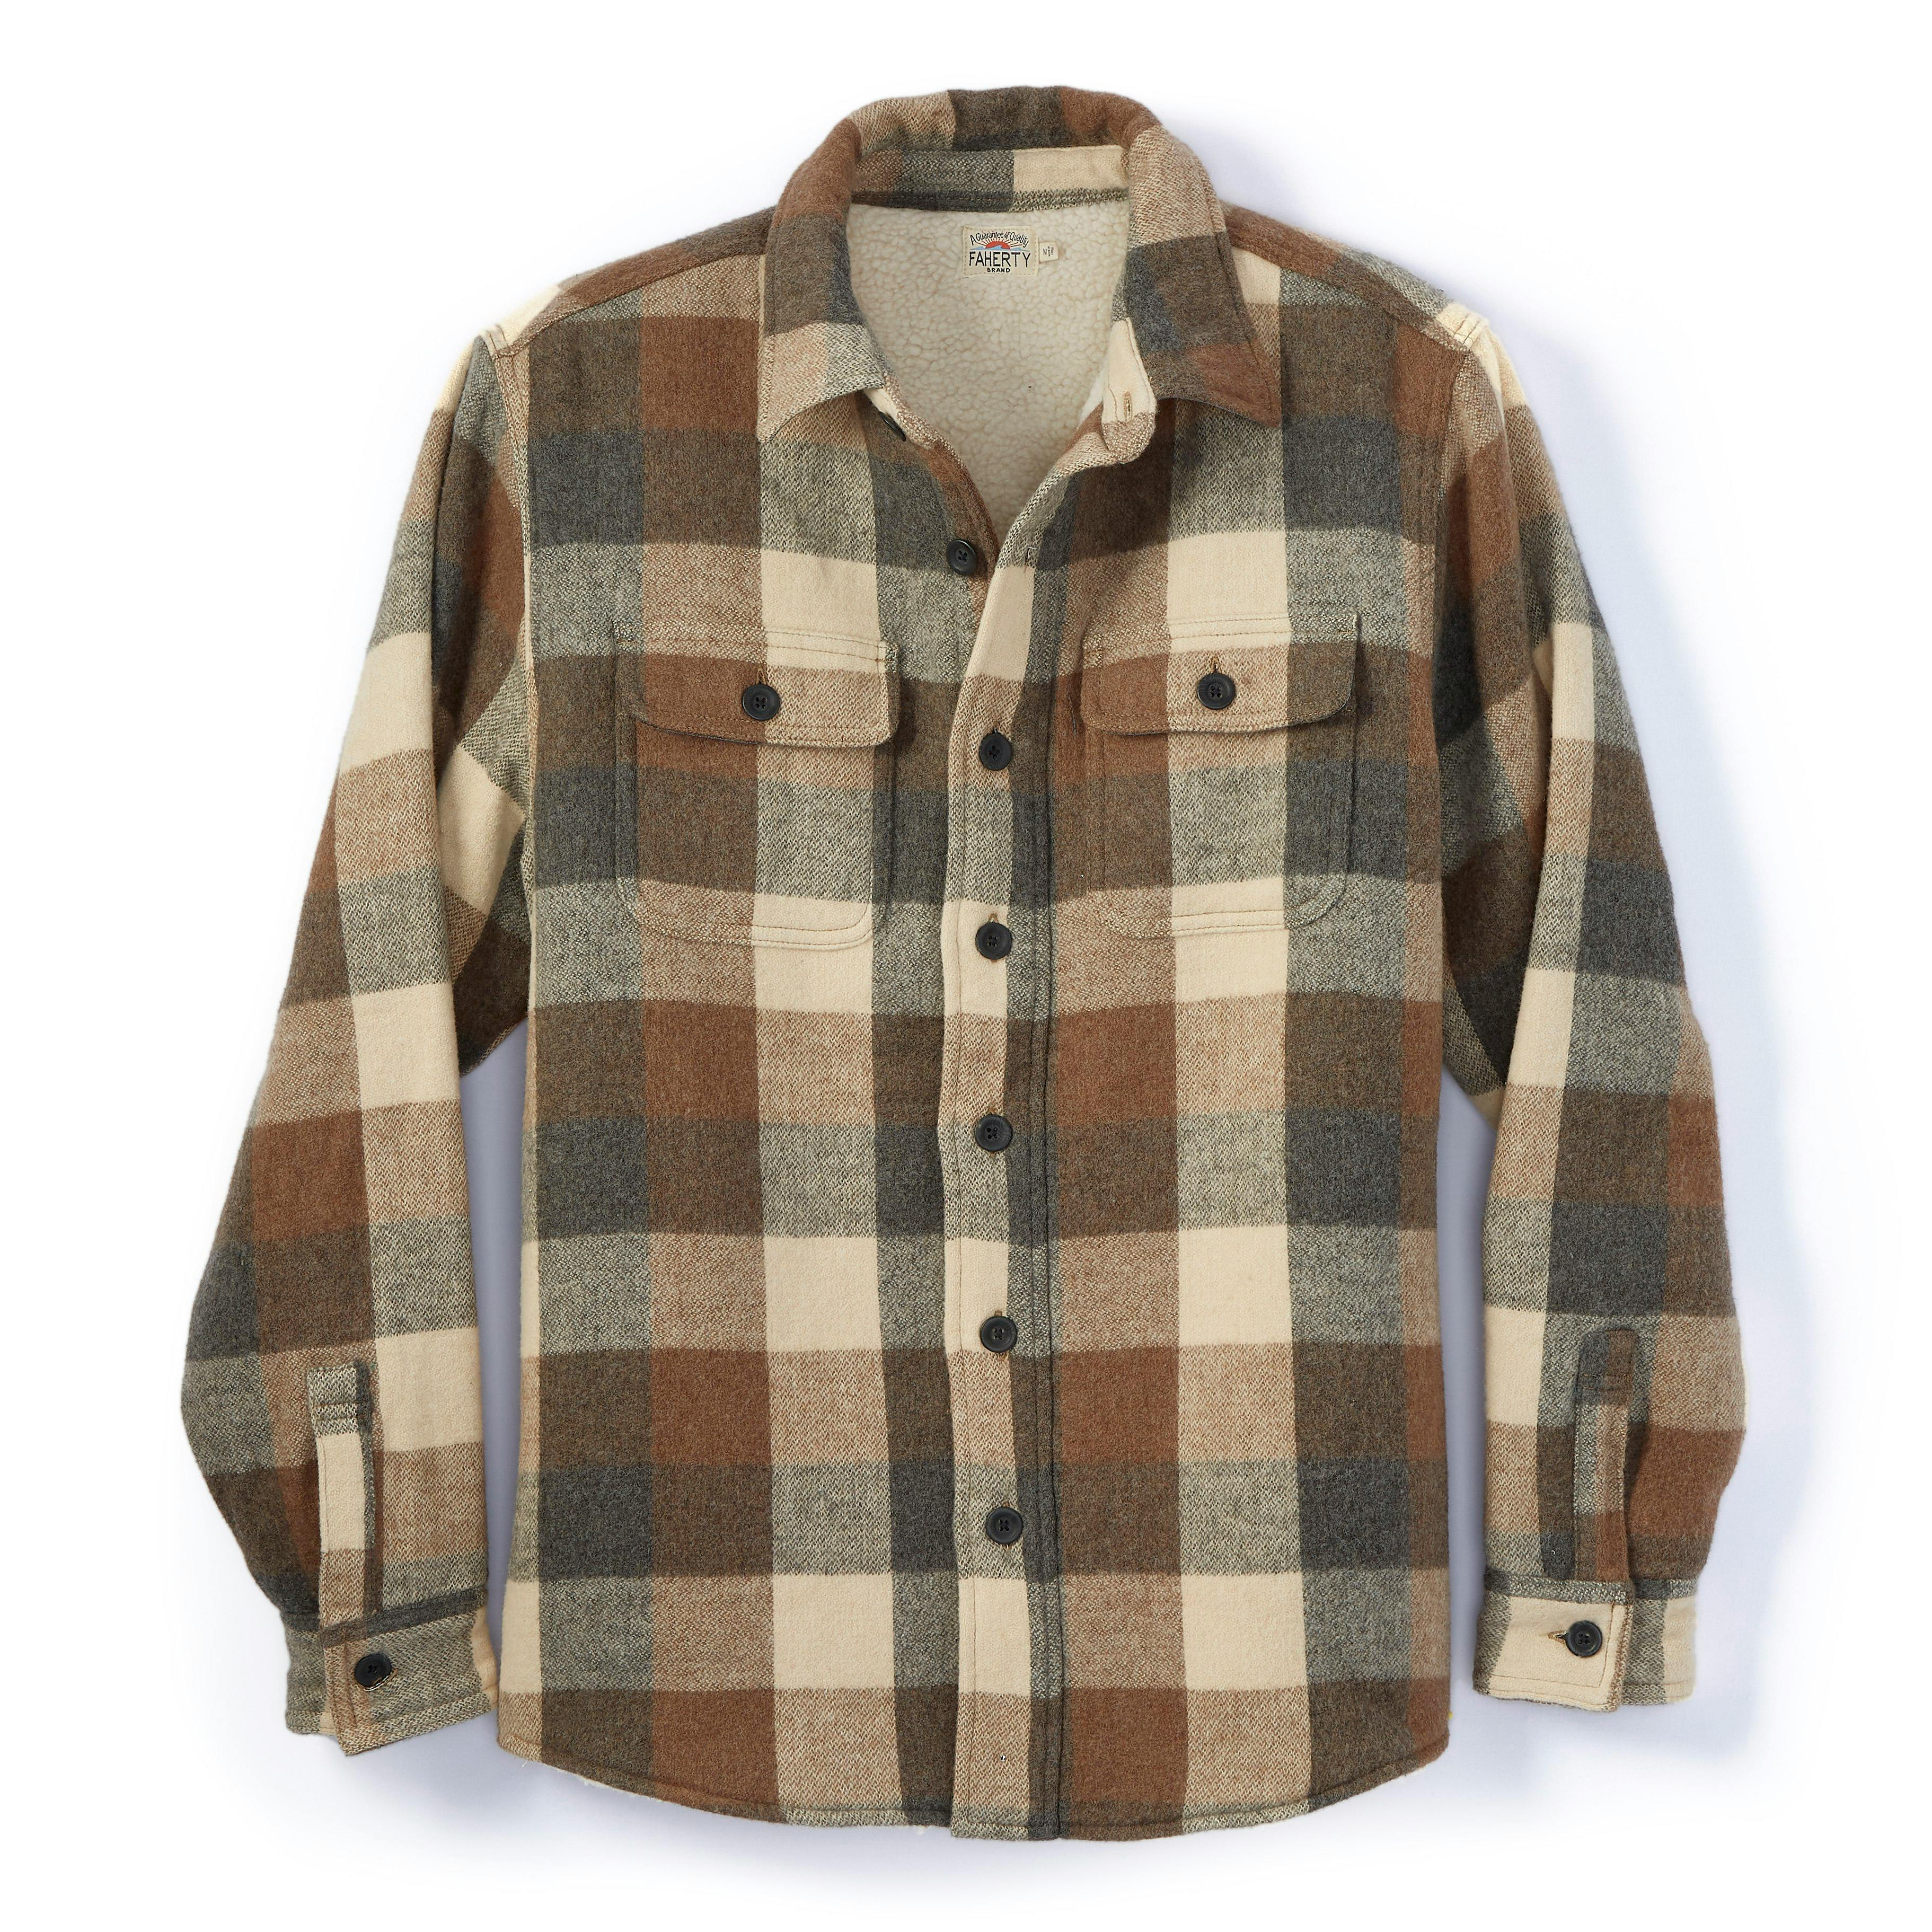 Sherpa Plaid Lined CPO - Exclusive